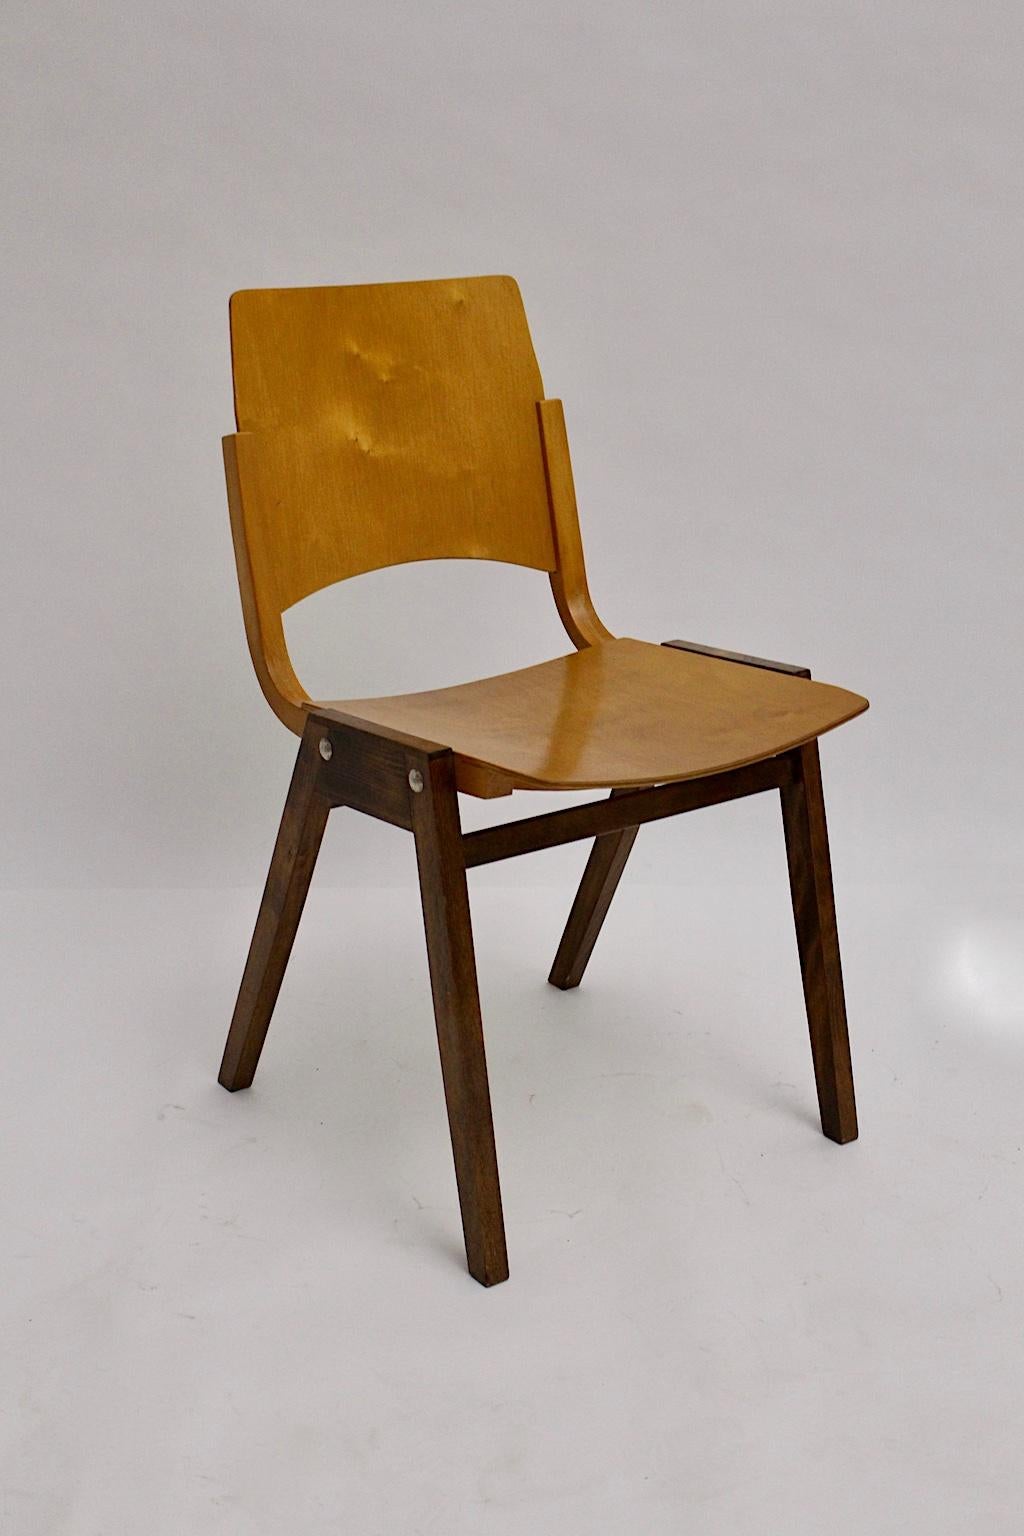 Mid-Century Modern Vintage Beech Bicolor Dining Chairs Roland Rainer 1952 Vienna For Sale 5